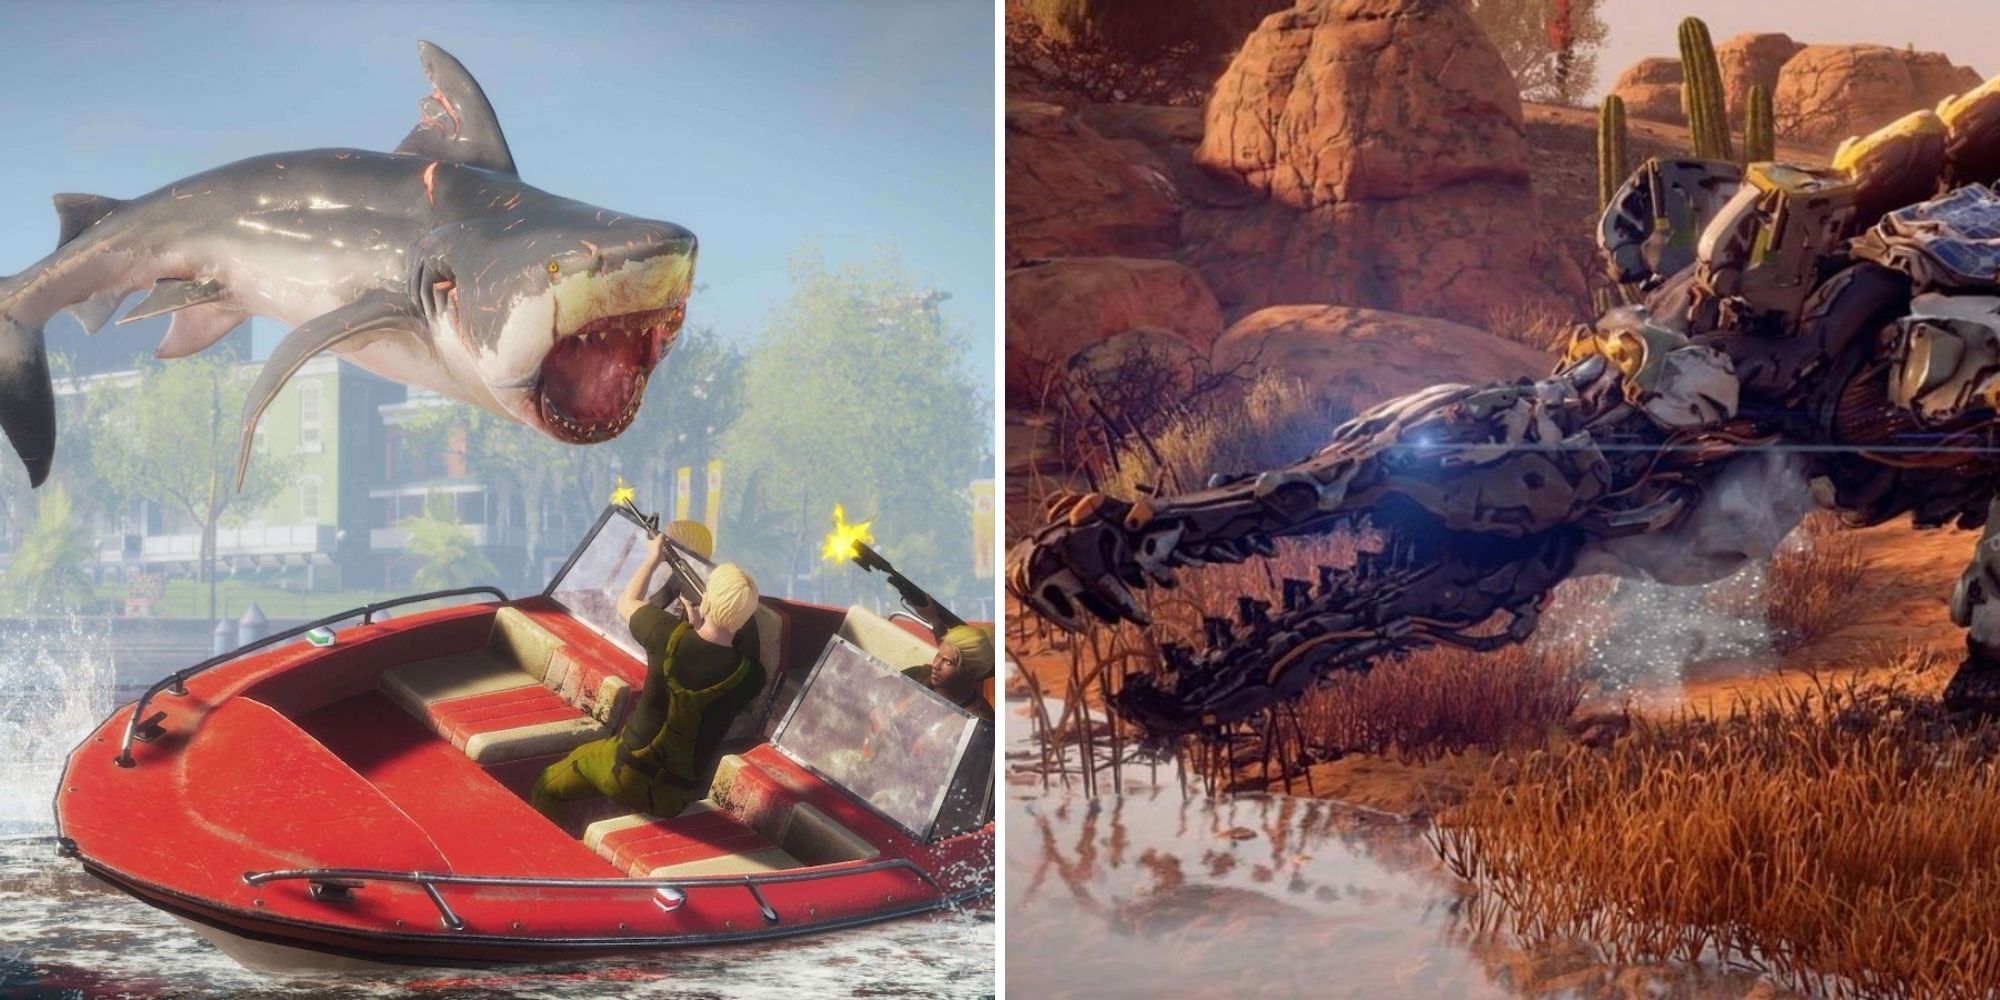 Split Image Shark from Maneater jumps out of the water as a Snapmaw from Horizon goes for a swim